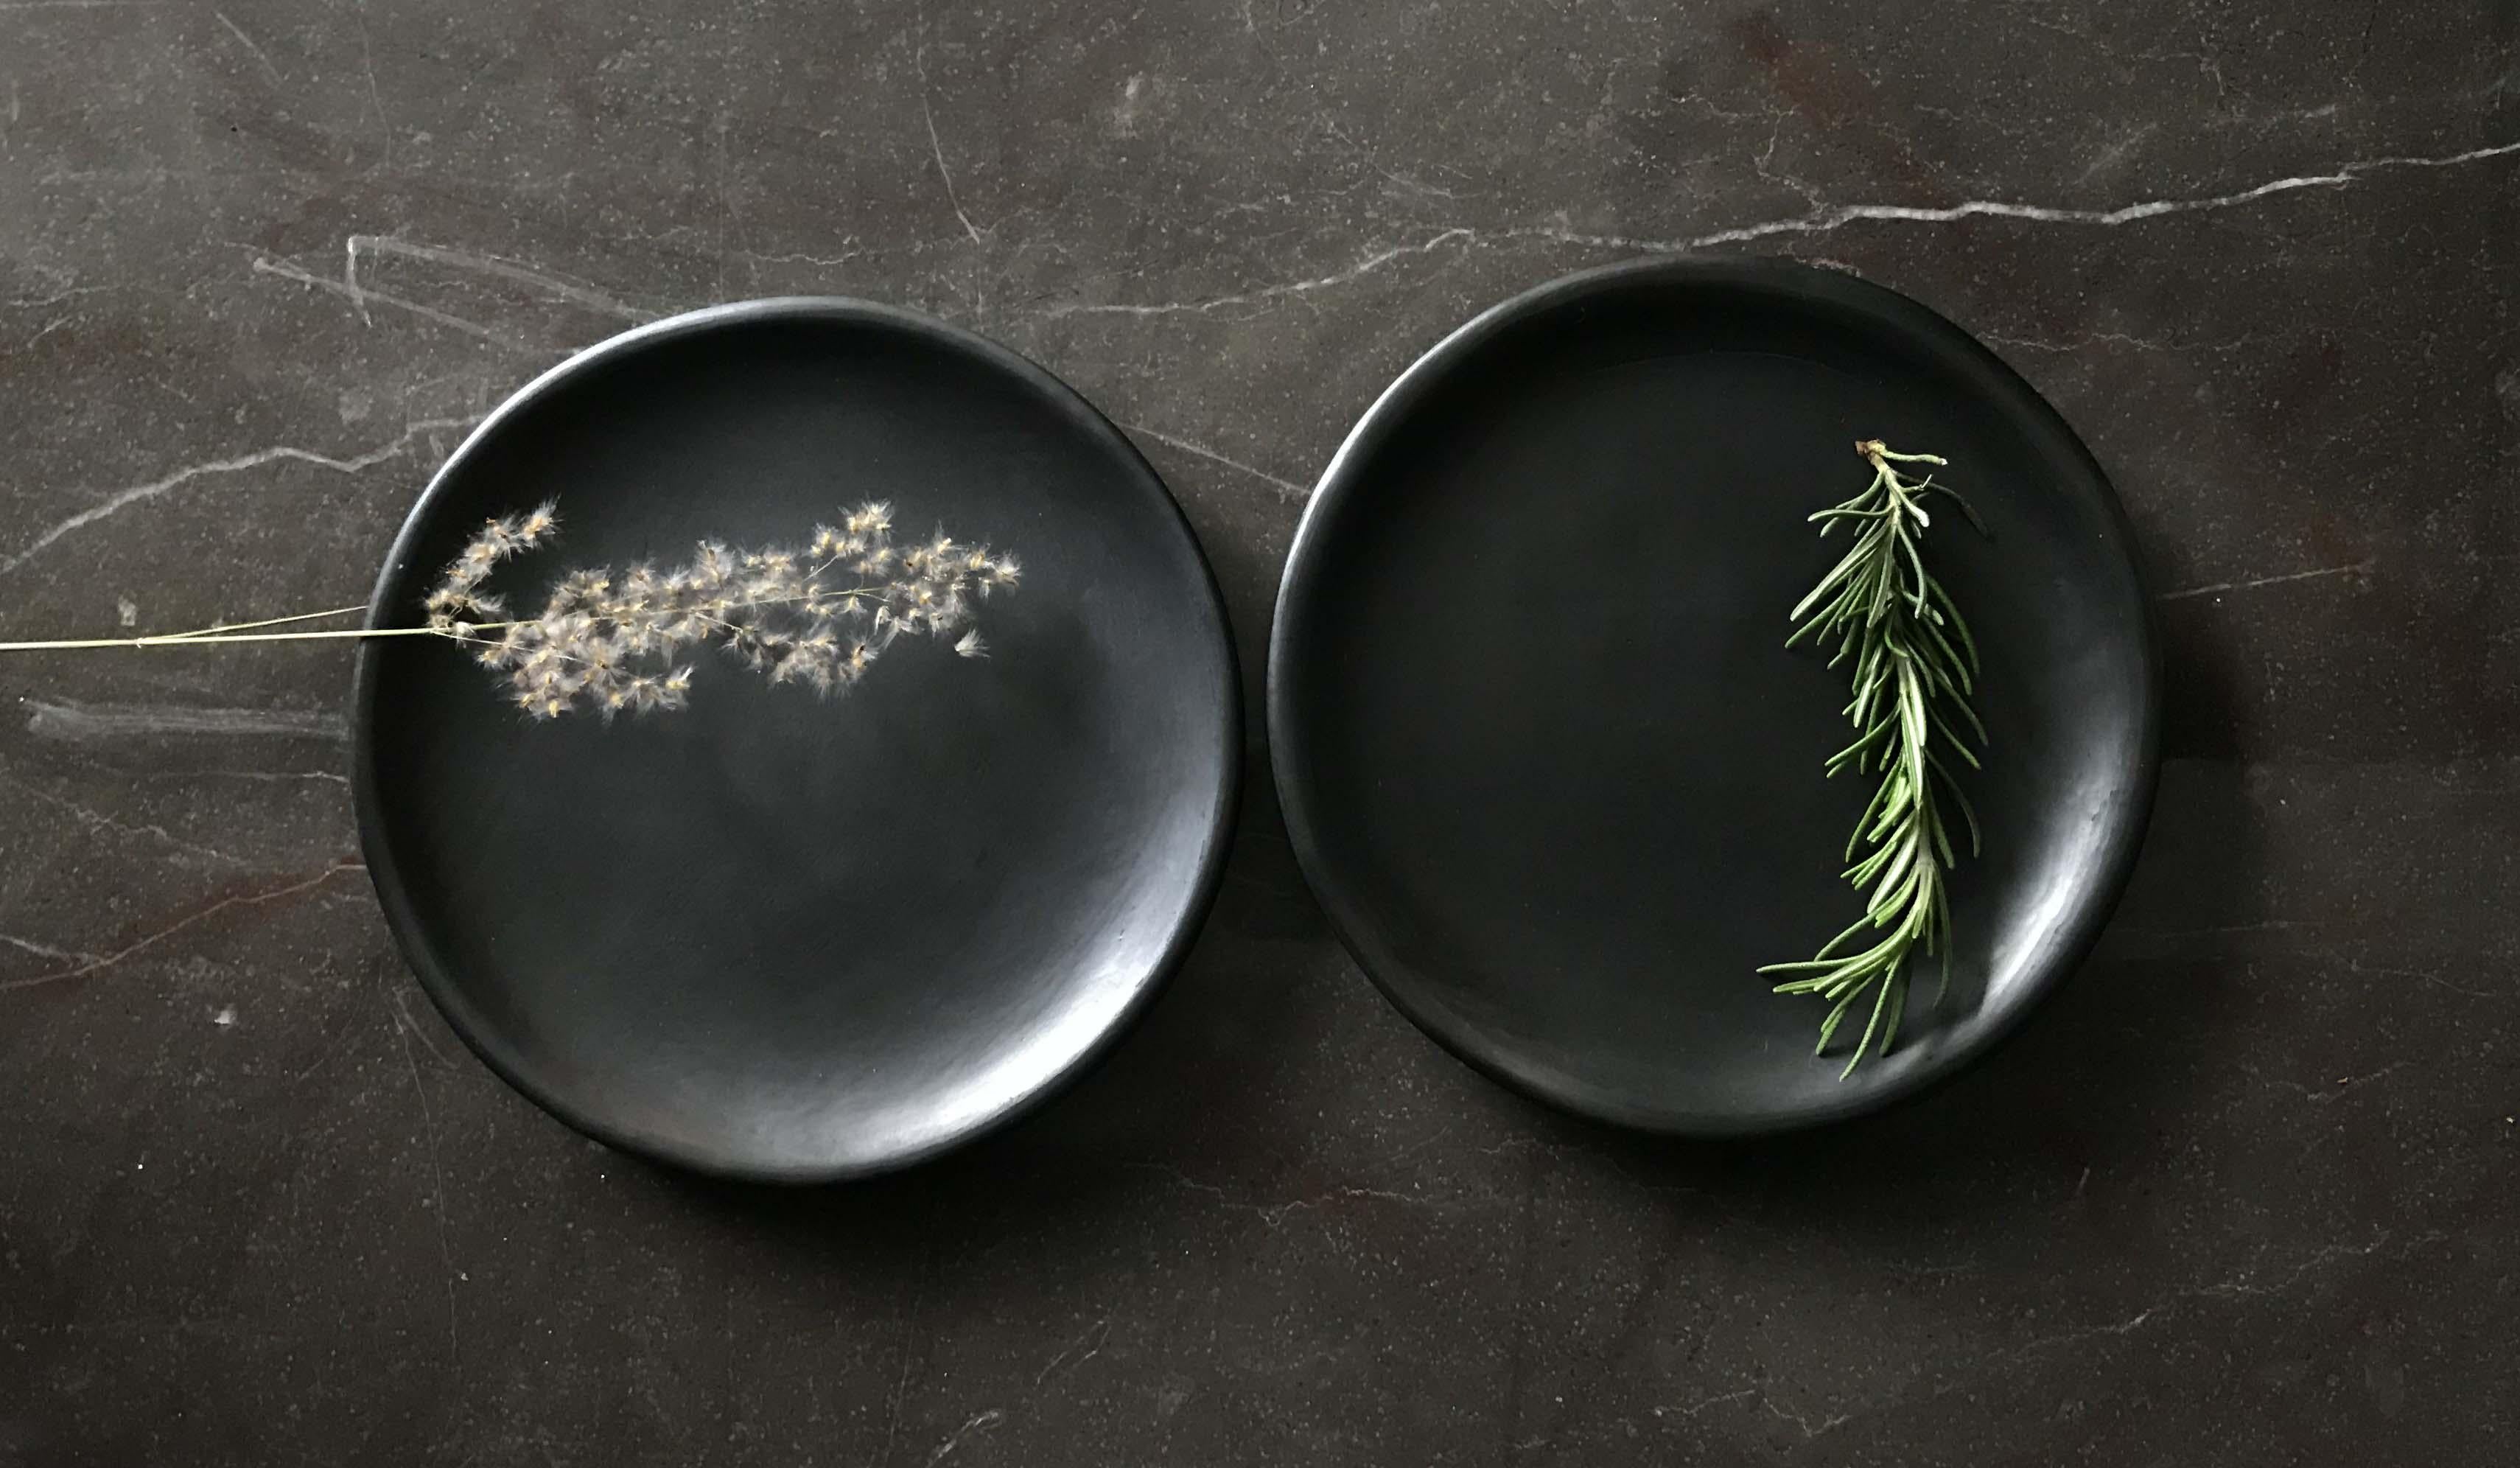 Oaxacan black clay 20cm plates handmade tableware burnished barro negro Oaxaca. Set of 2 pieces.

The soft and rich colour makes this side plate a stylish partner to bread, butter or more spectacular starters.

Handmade in Oaxaca, a state rich